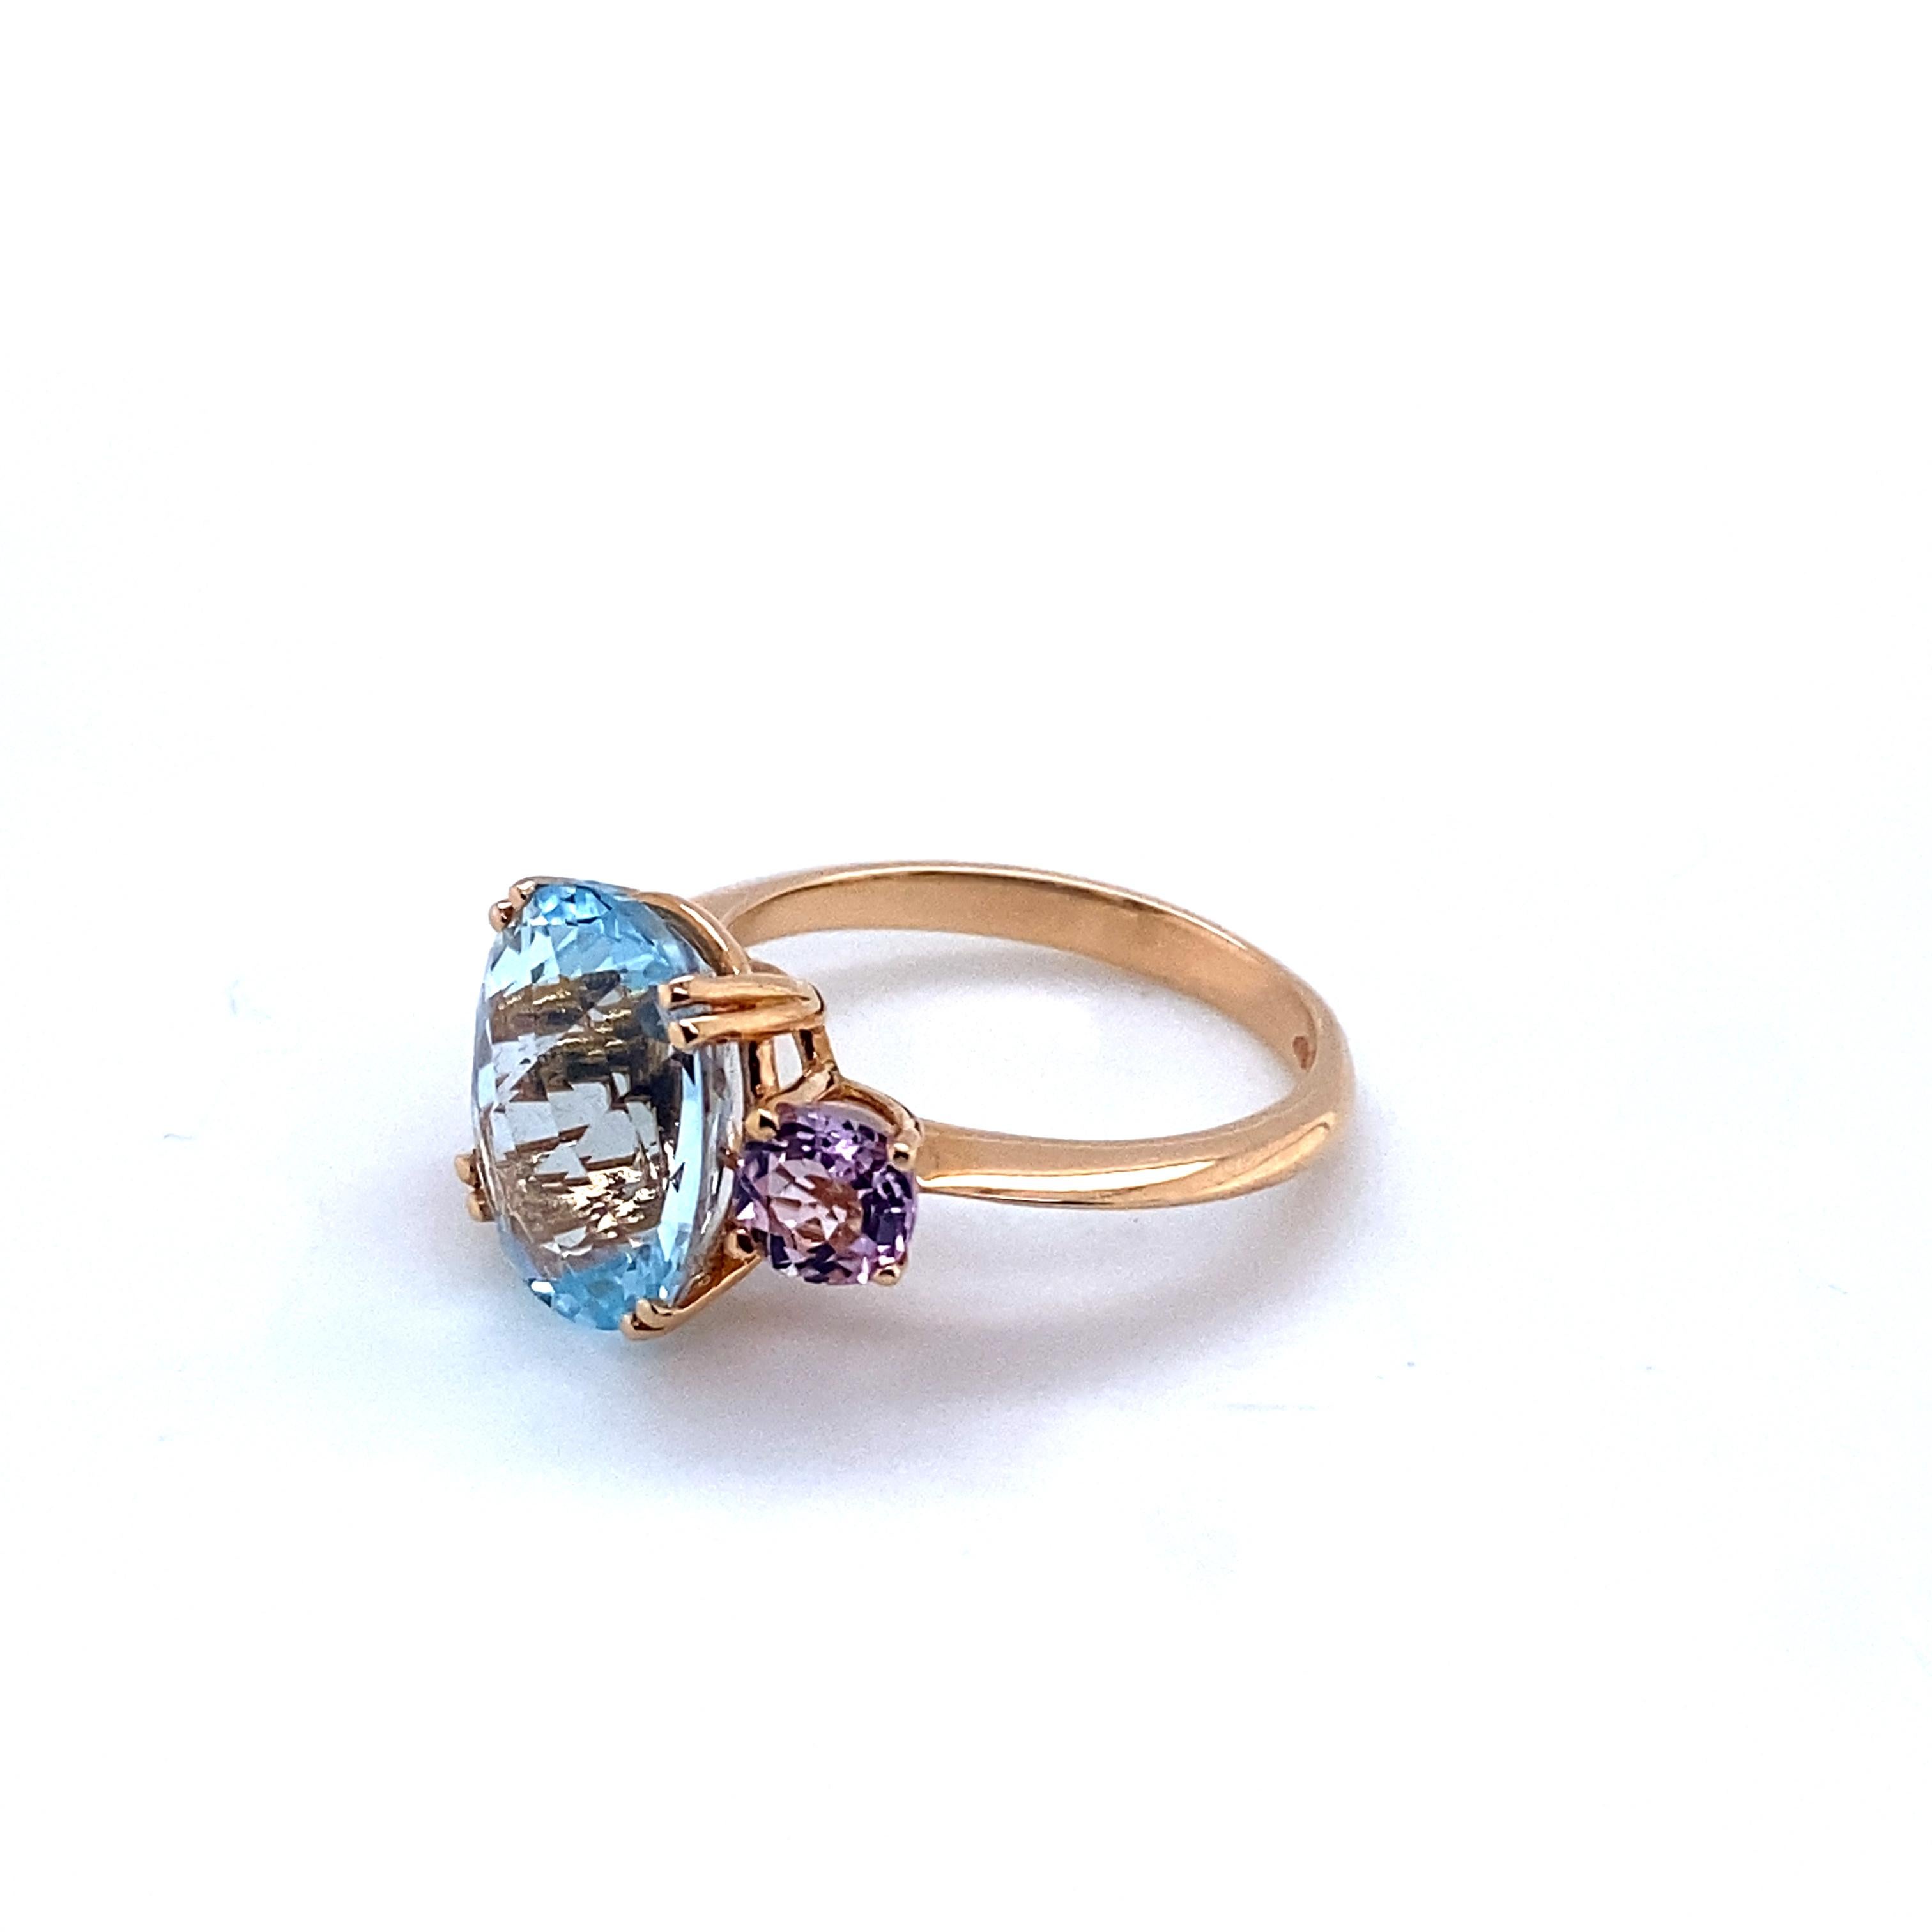 Yellow Gold Ring Surmounted by an Oval Topaz Accompanied by two Kunzites
French Collection by Mesure et Art du Temps.

The Oval Topaz is 1.3cm in length and 1cm in width.
The Kunzite is 0.5cm in length and 0.5cm in width.
The weight of the gold is